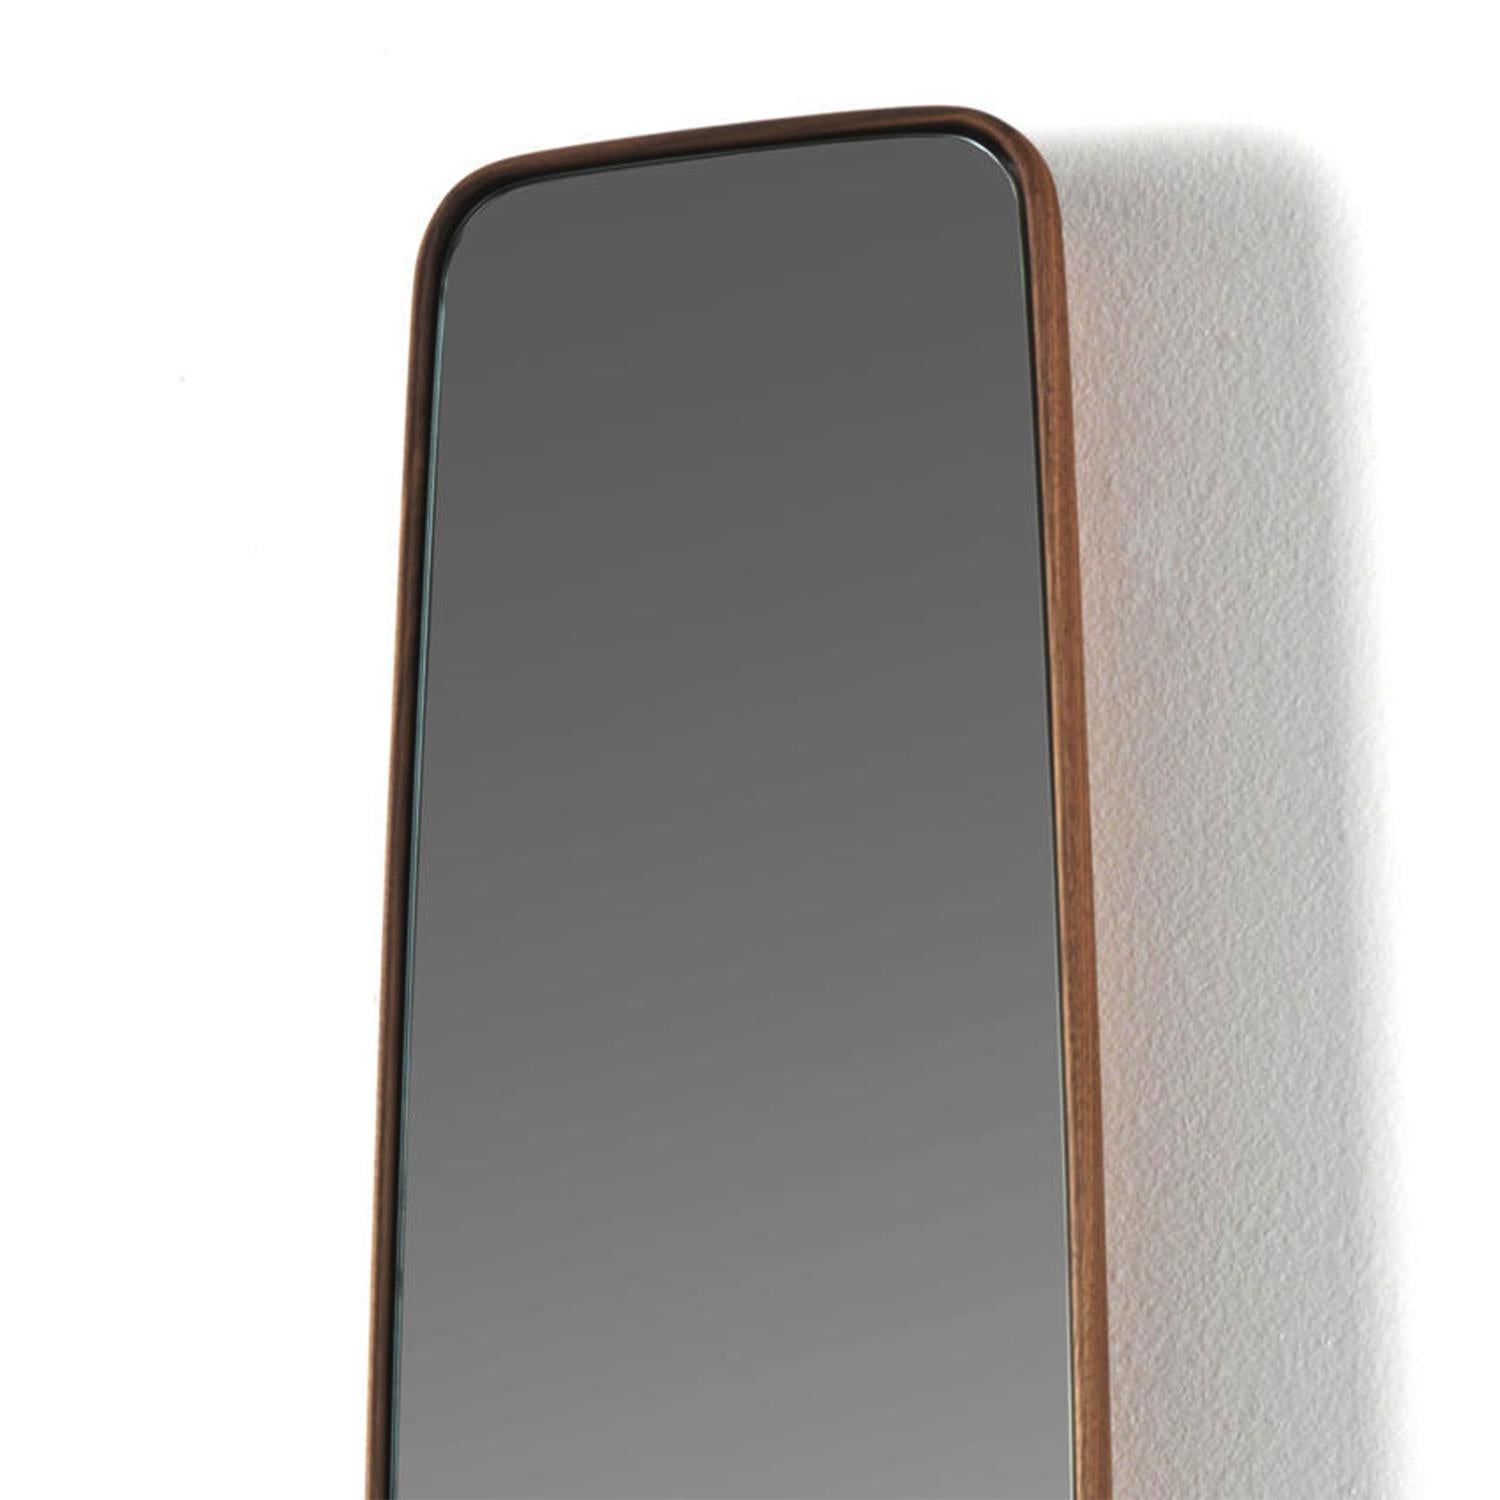 Mirror Sticky Walnut with solid walnut
frame and with mirror glass. Wall mirror
can be hanged vertically or horizontally.
Mirror frame's back is rounded bevelled
with solid walnut wood.